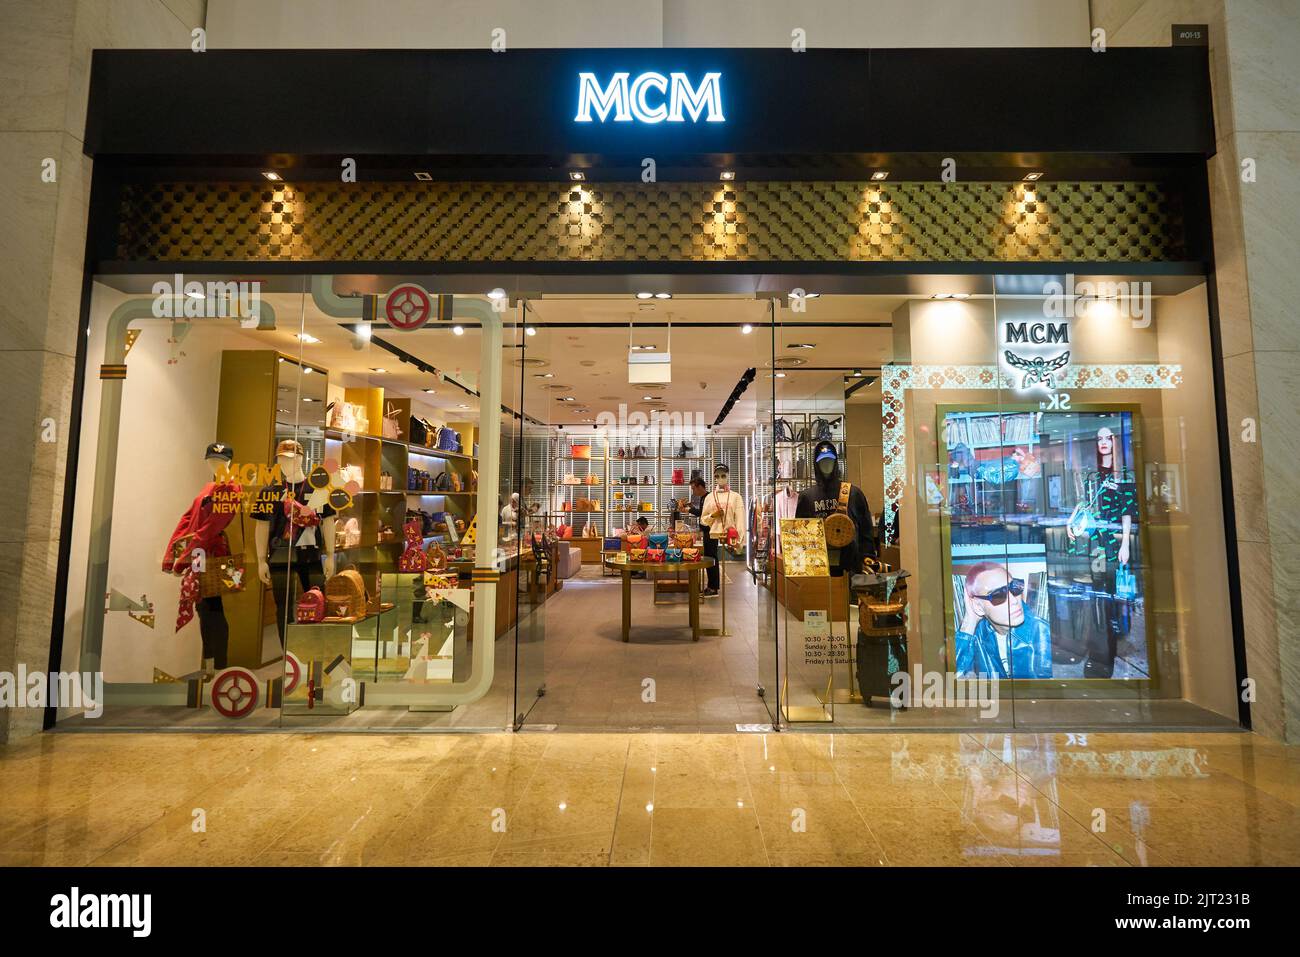 SINGAPORE - JANUARY 20, 2020: MCM storefront at Marina Bay Sands in Singapore. MCM Worldwide is a leather luxury goods brand. Stock Photo